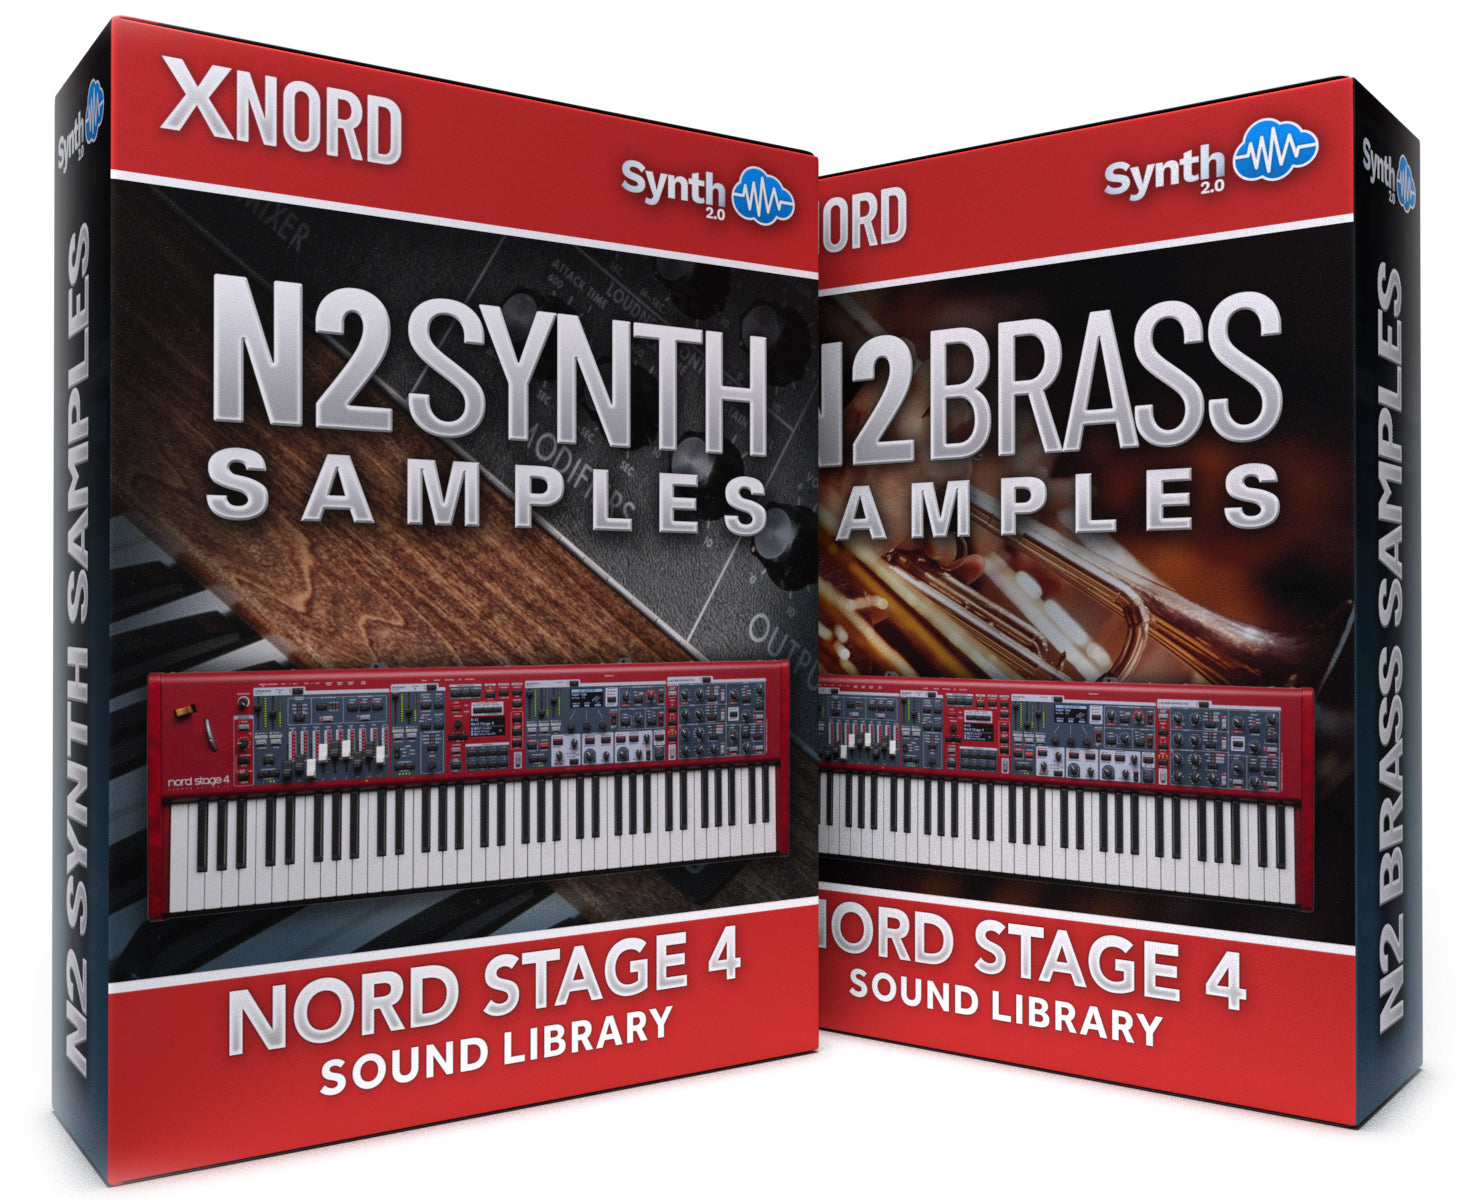 SCL137 - ( Bundle ) - N2 Synth Samples + N2 Brass Samples - Nord Stage 4